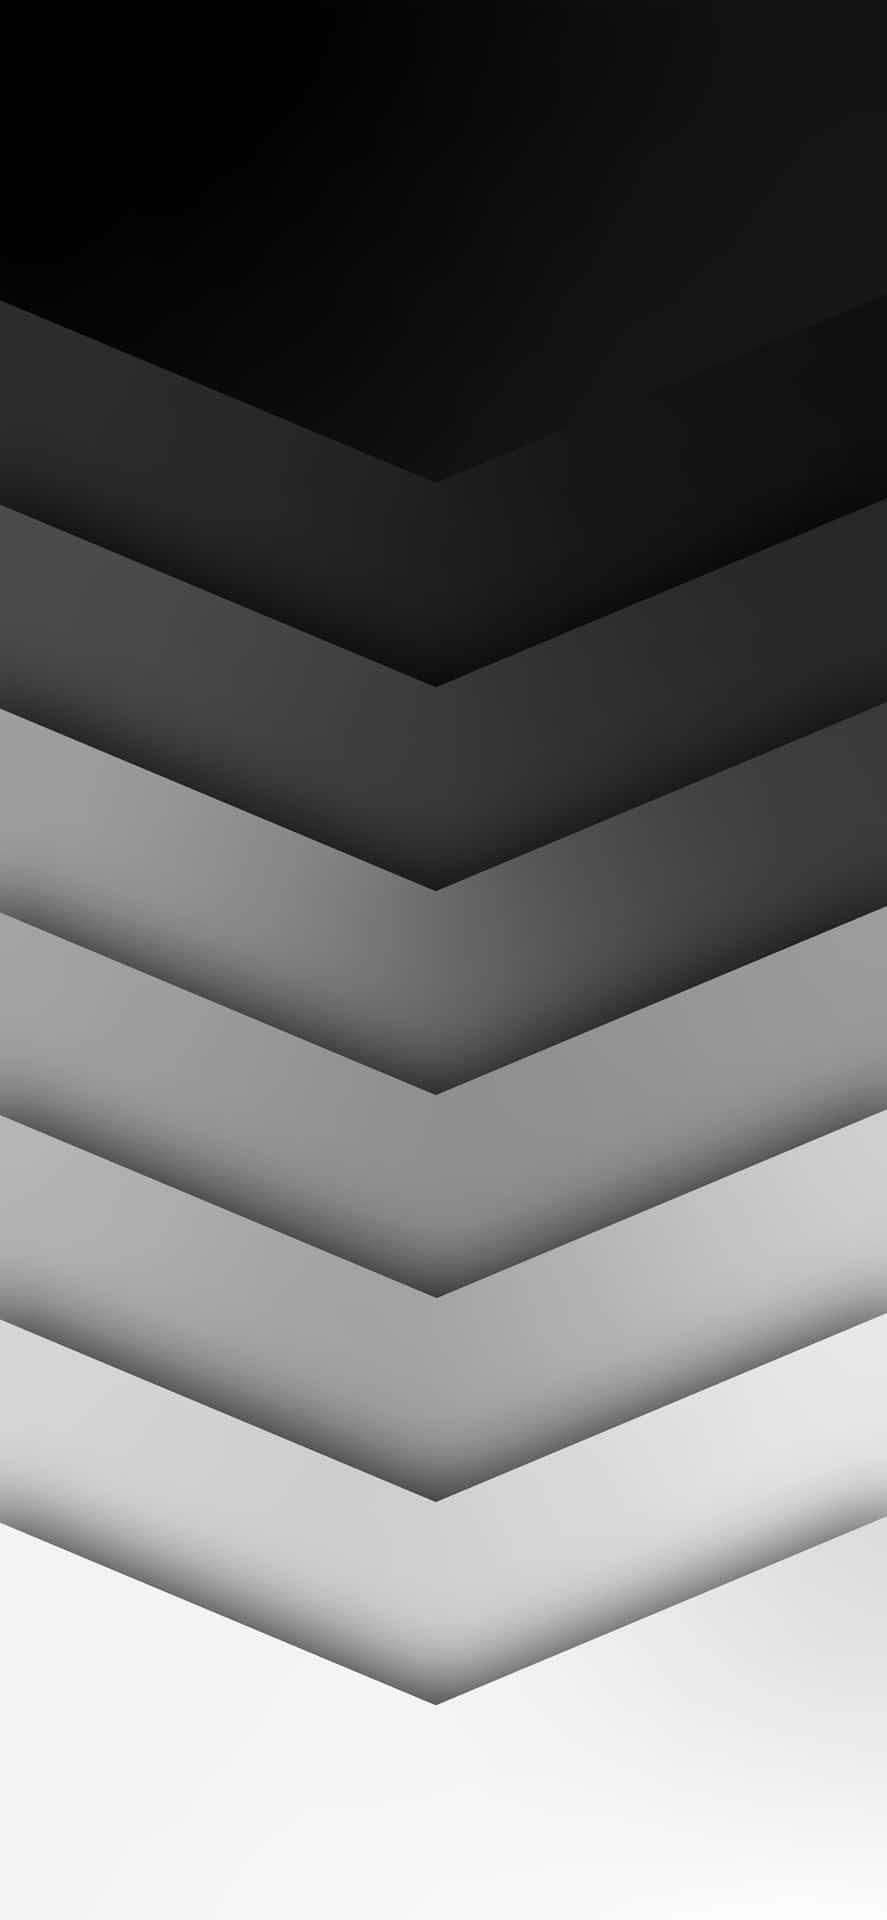 Black And White Abstract Background With A Zigzag Pattern Wallpaper